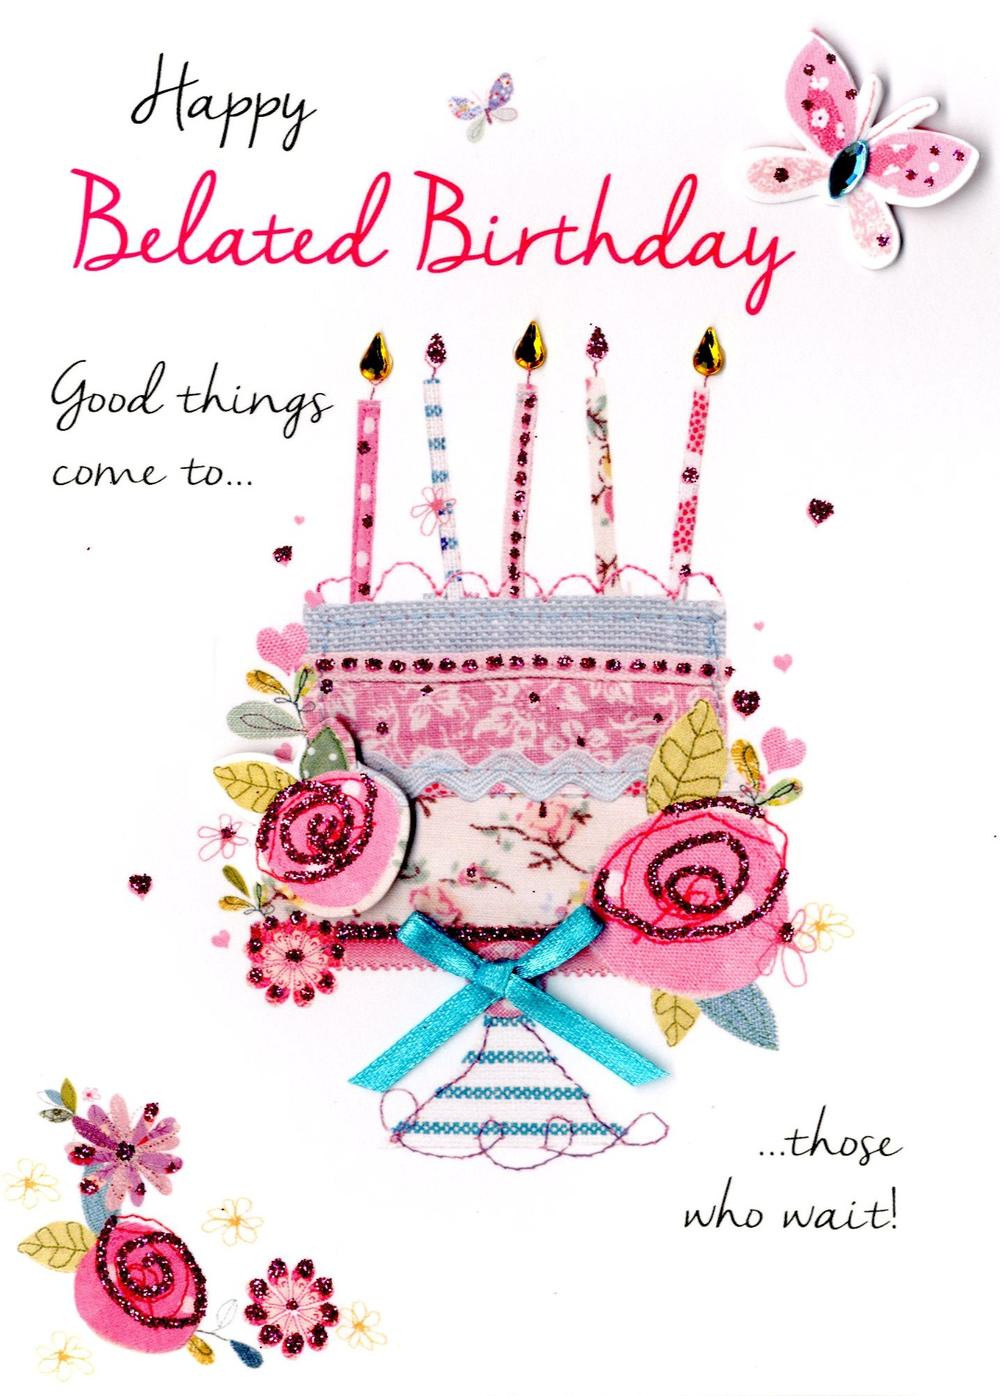 Late Happy Birthday Wishes
 Happy Belated Birthday Greeting Card